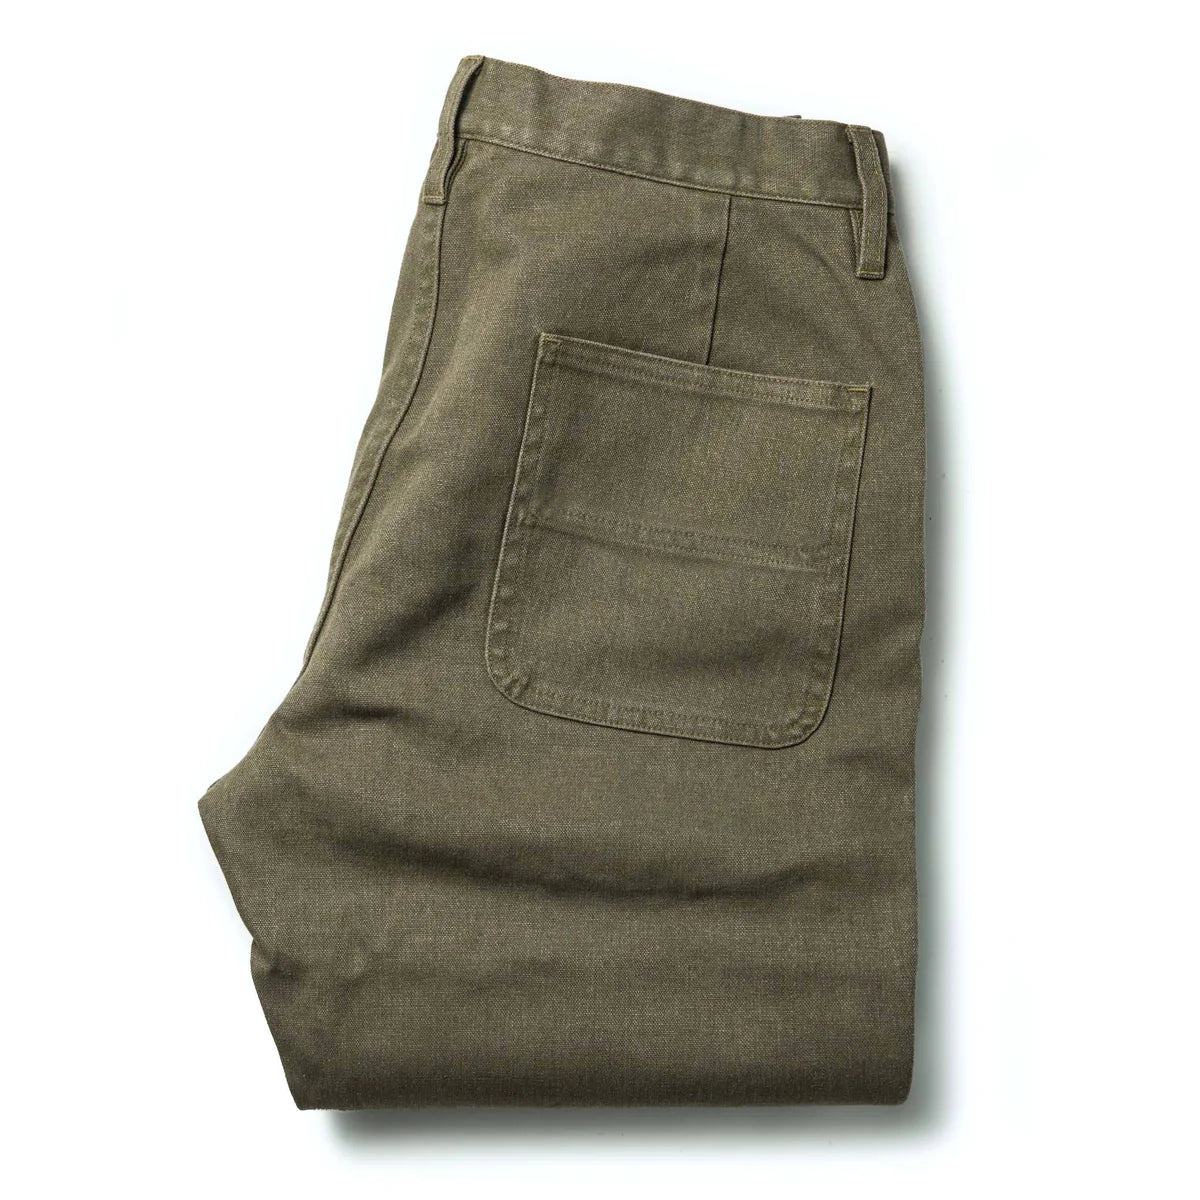 TAYLOR STITCH THE CAMP PANT IN STONE BOSS DUCK